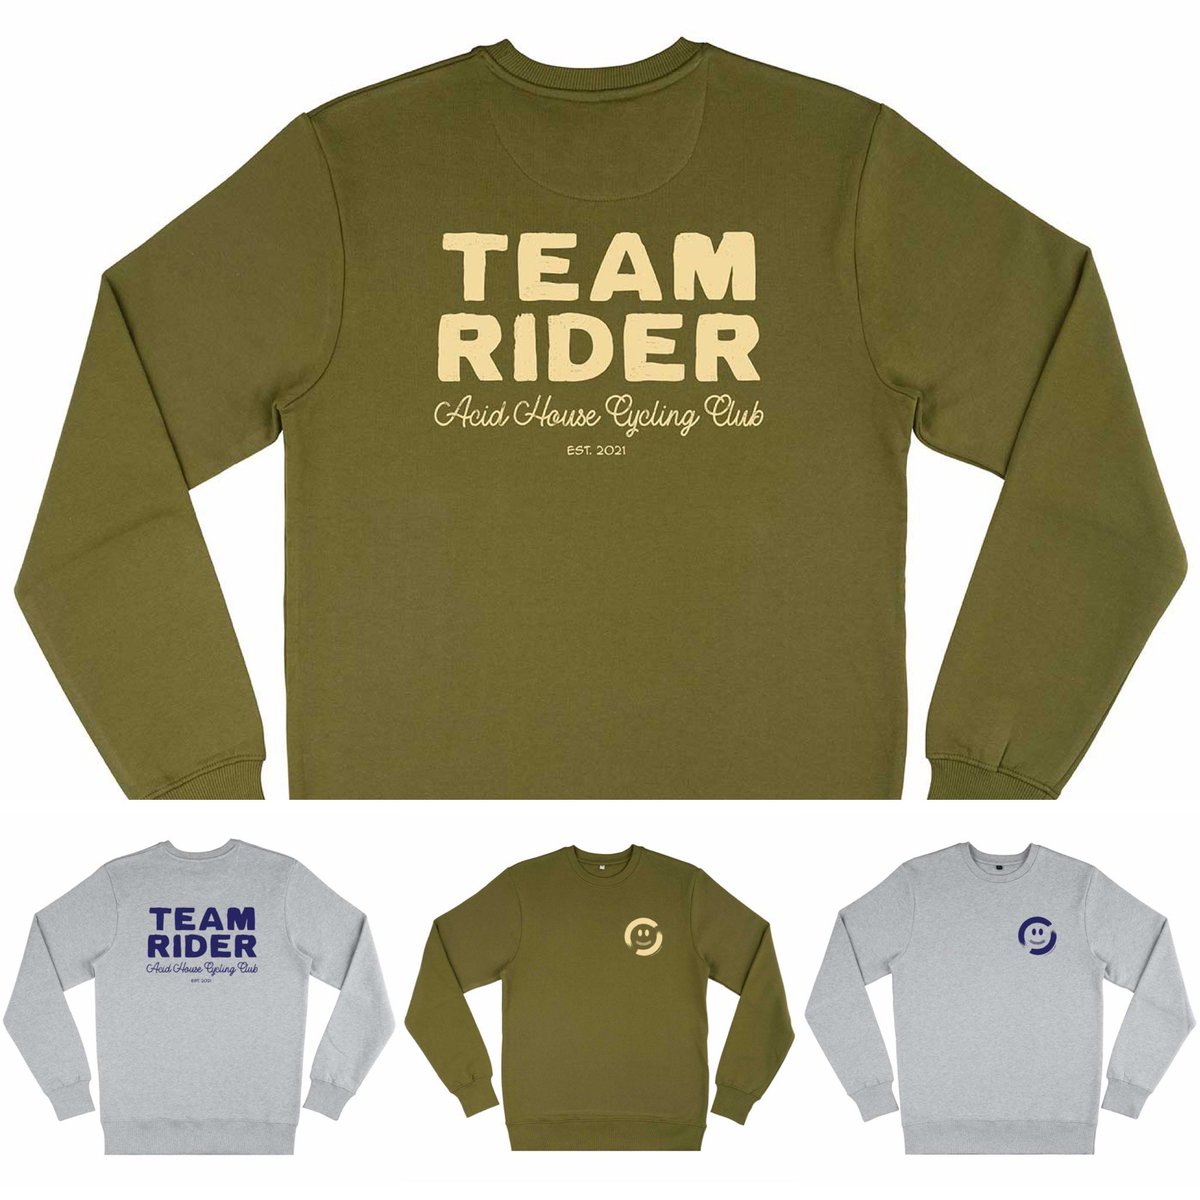 🚨RESTOCK🚨Riders ready. Our @deanrmarsh Acid House Cycling Club Team Riders sweatshirts are back! #acidhouse #cycling #organiccotton #acidhousecyclingclub